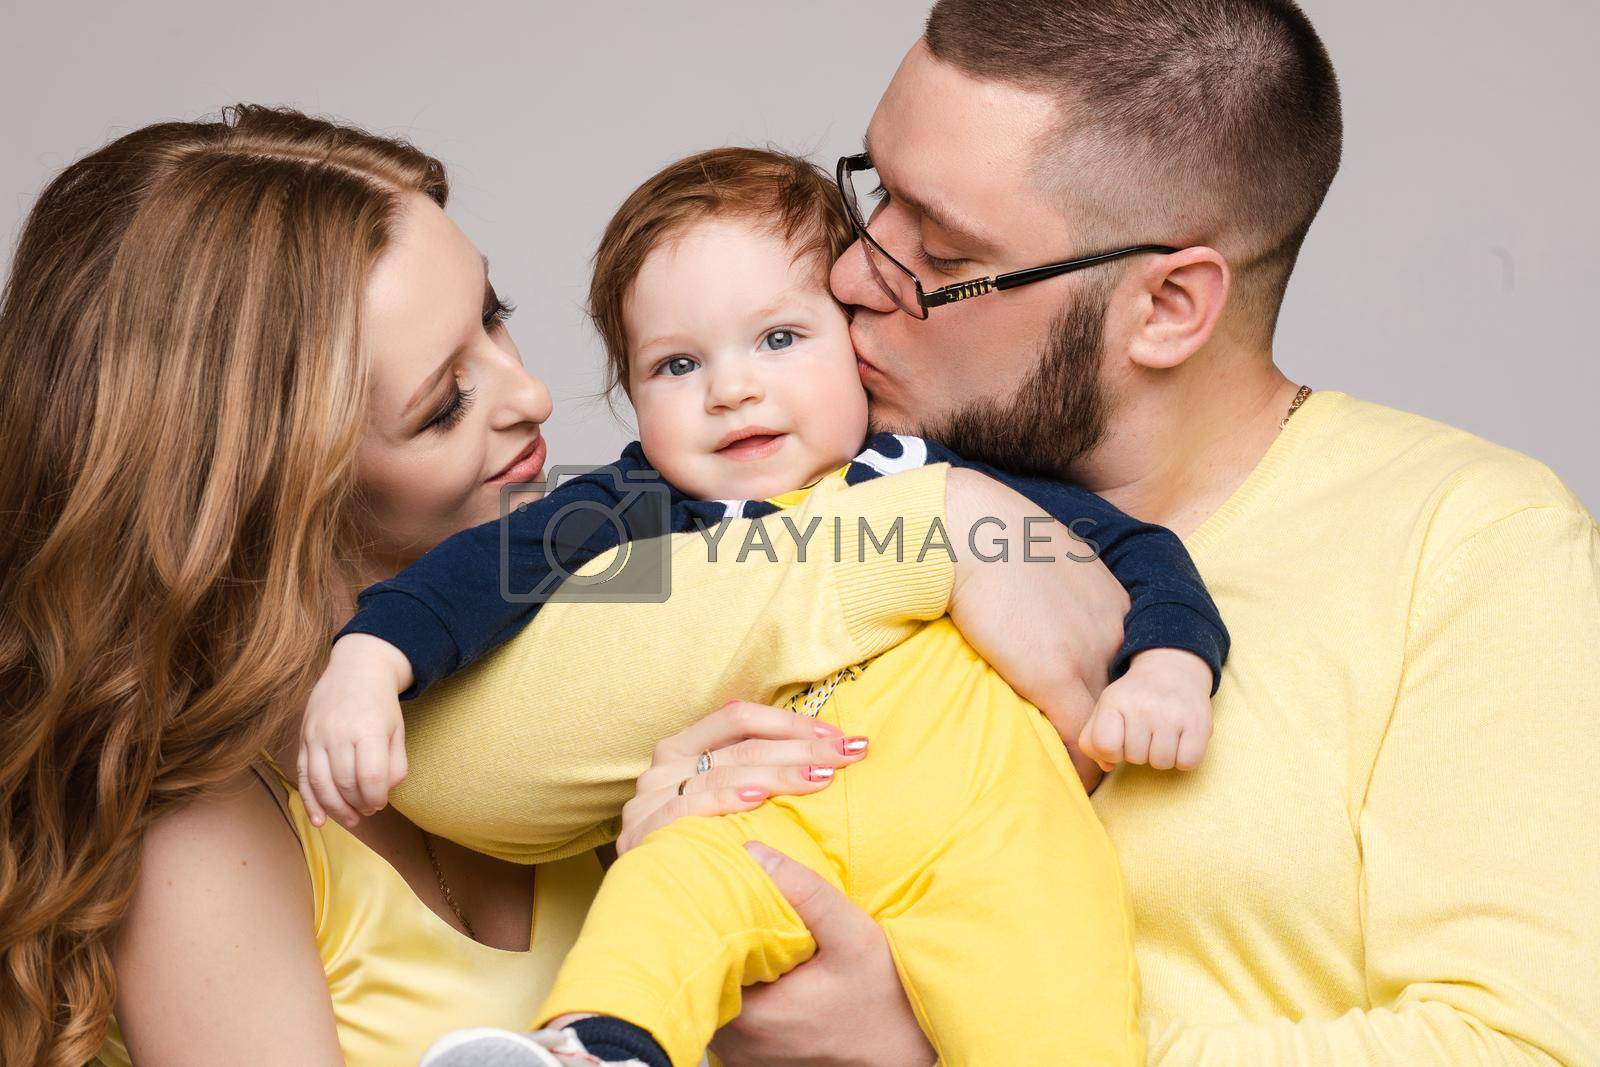 Royalty free image of Family in yellow outfit posing on isolated background by StudioLucky